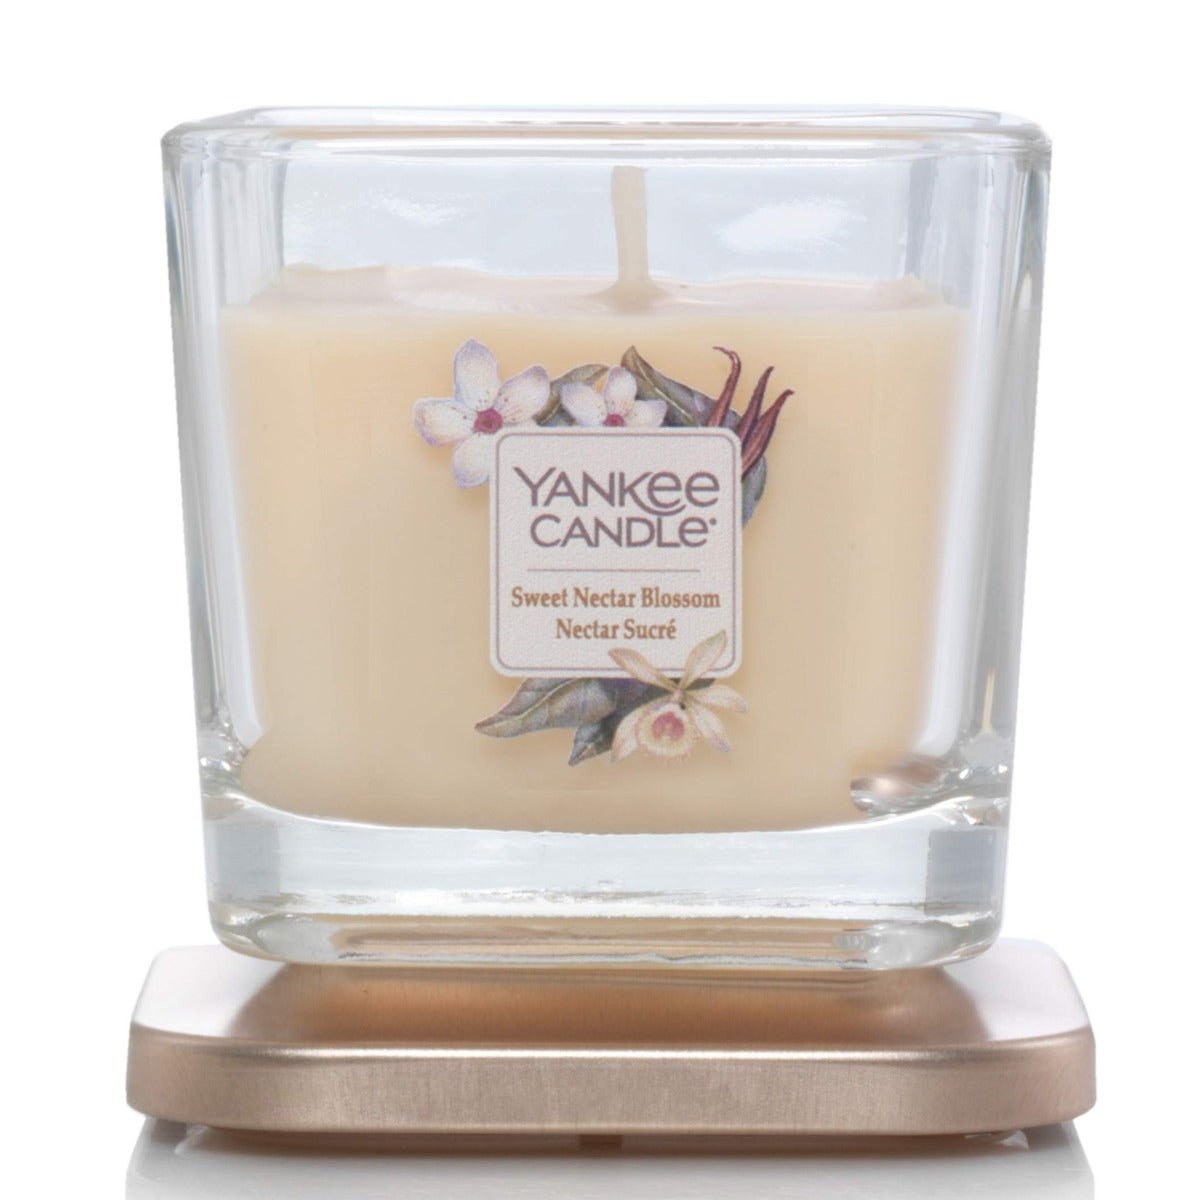 Yankee Candle Elevation Limited Edition Small Sweet Nectar Blossom 96 G - AllurebeautypkYankee Candle Elevation Limited Edition Small Sweet Nectar Blossom 96 G